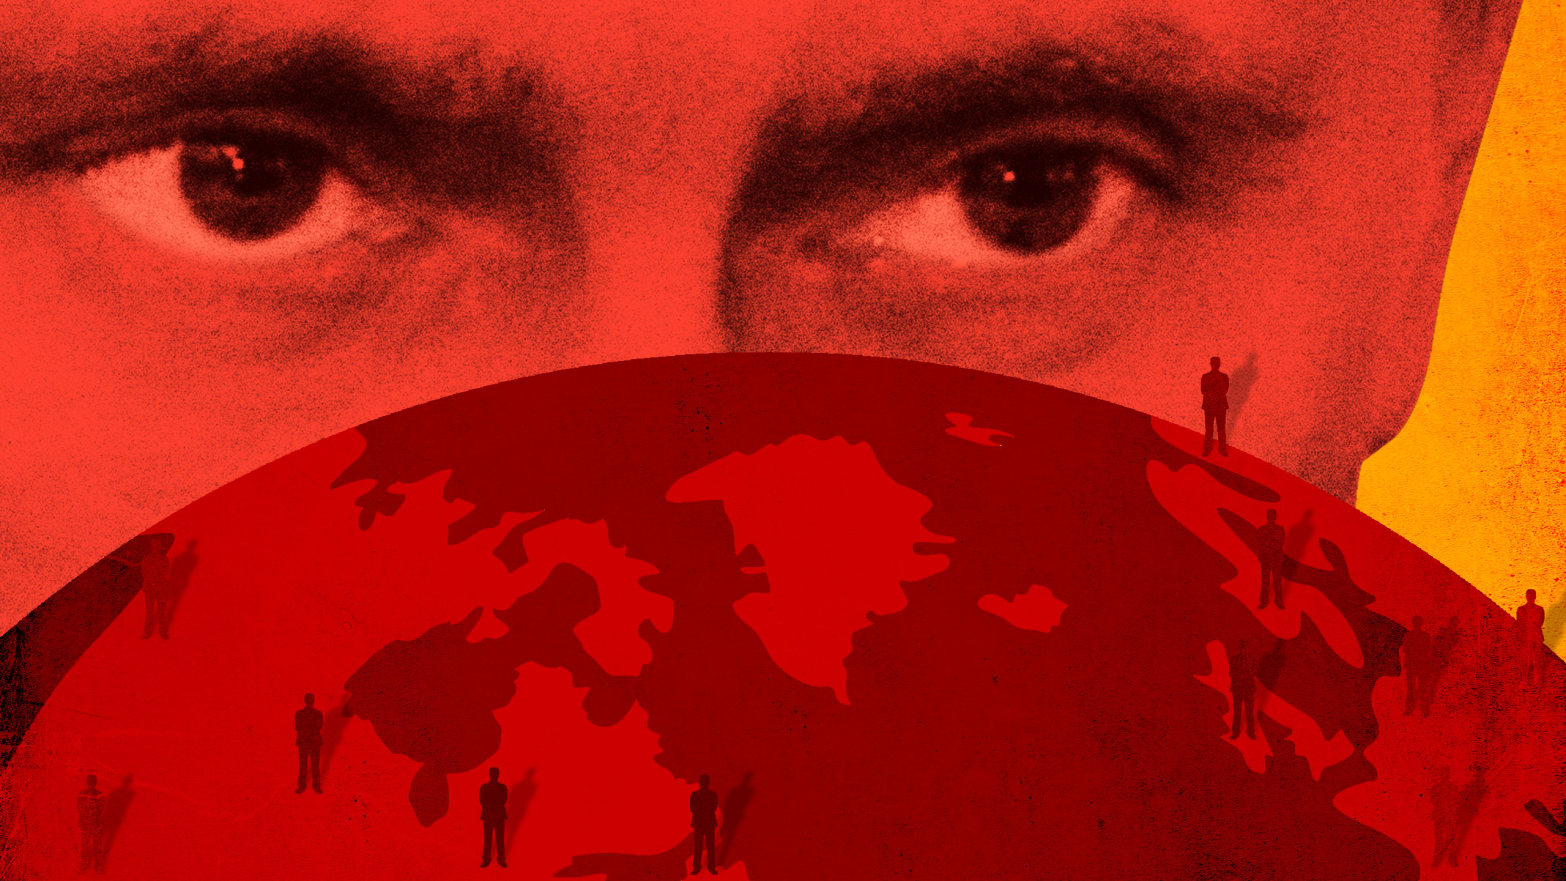 The Kgb Playbook For Turning Russians Worldwide Into Agents